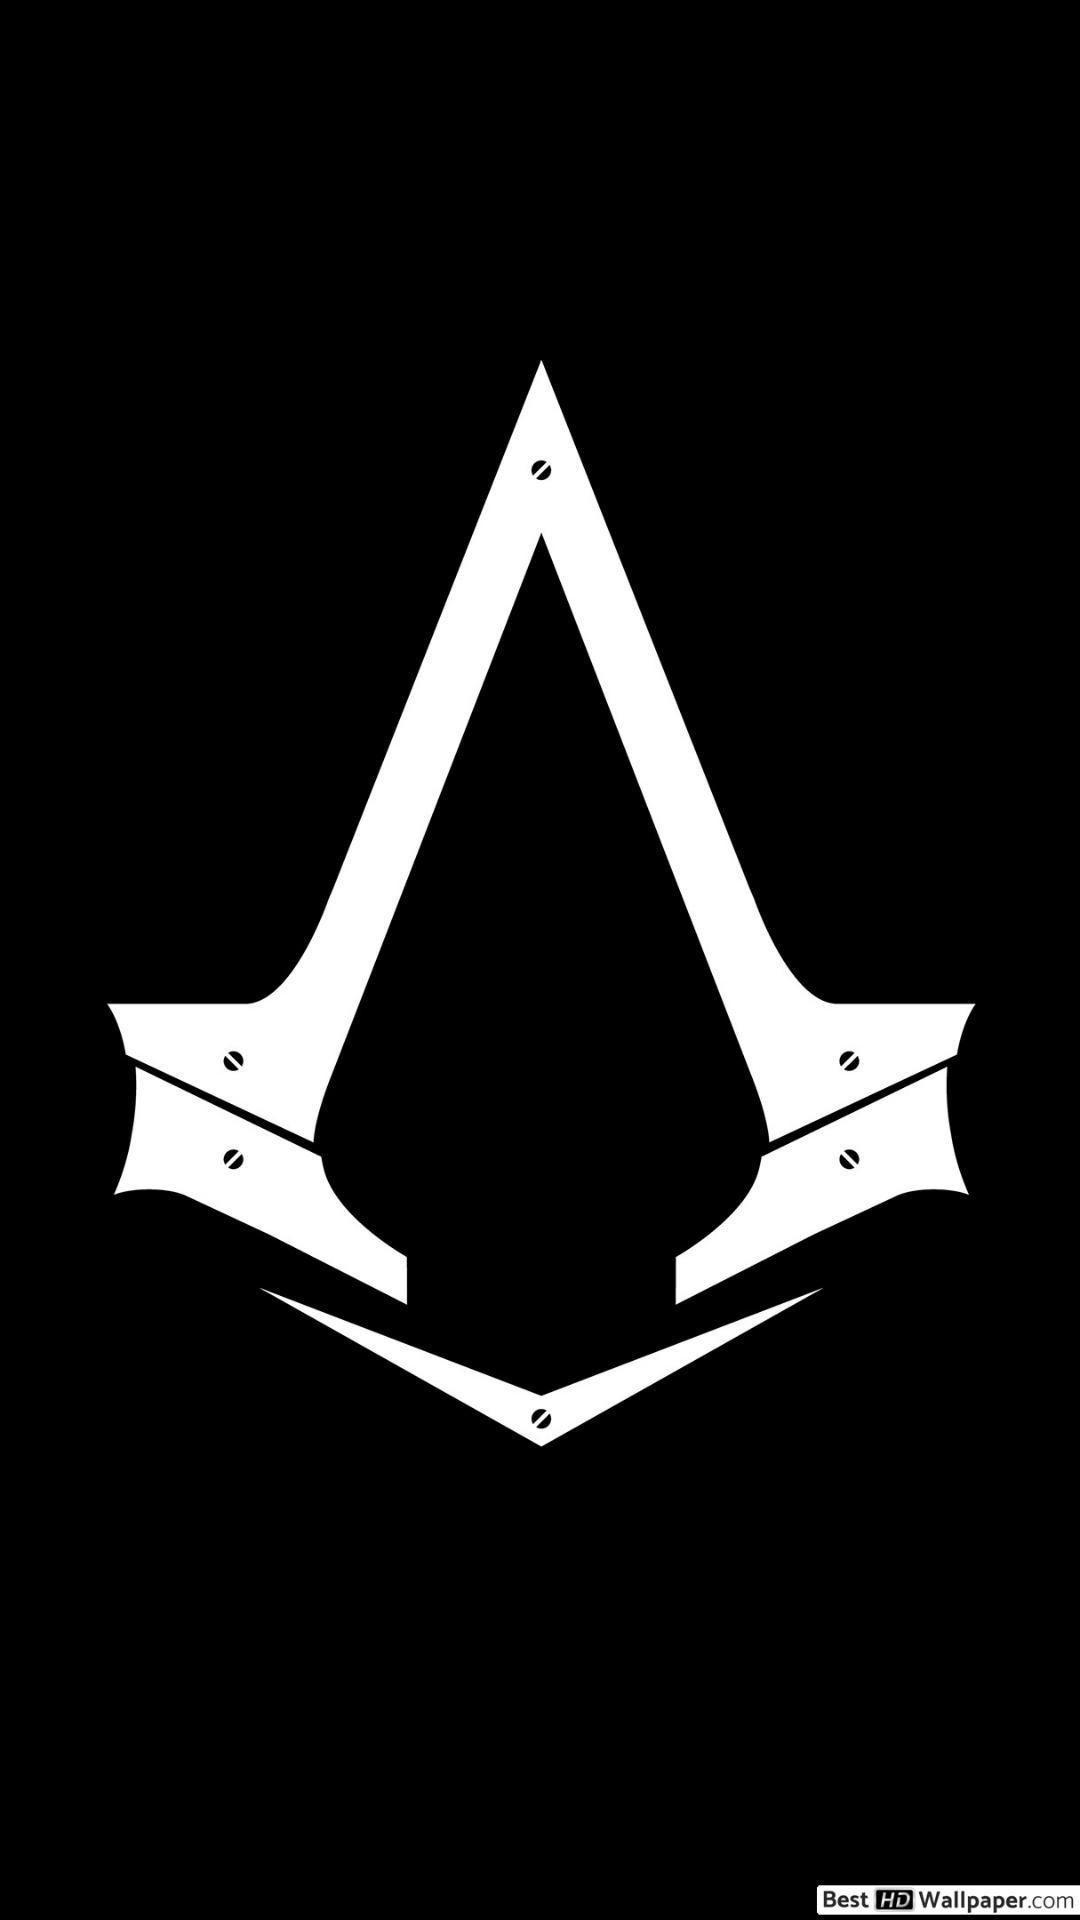 Assassin’s Creed download the new for apple